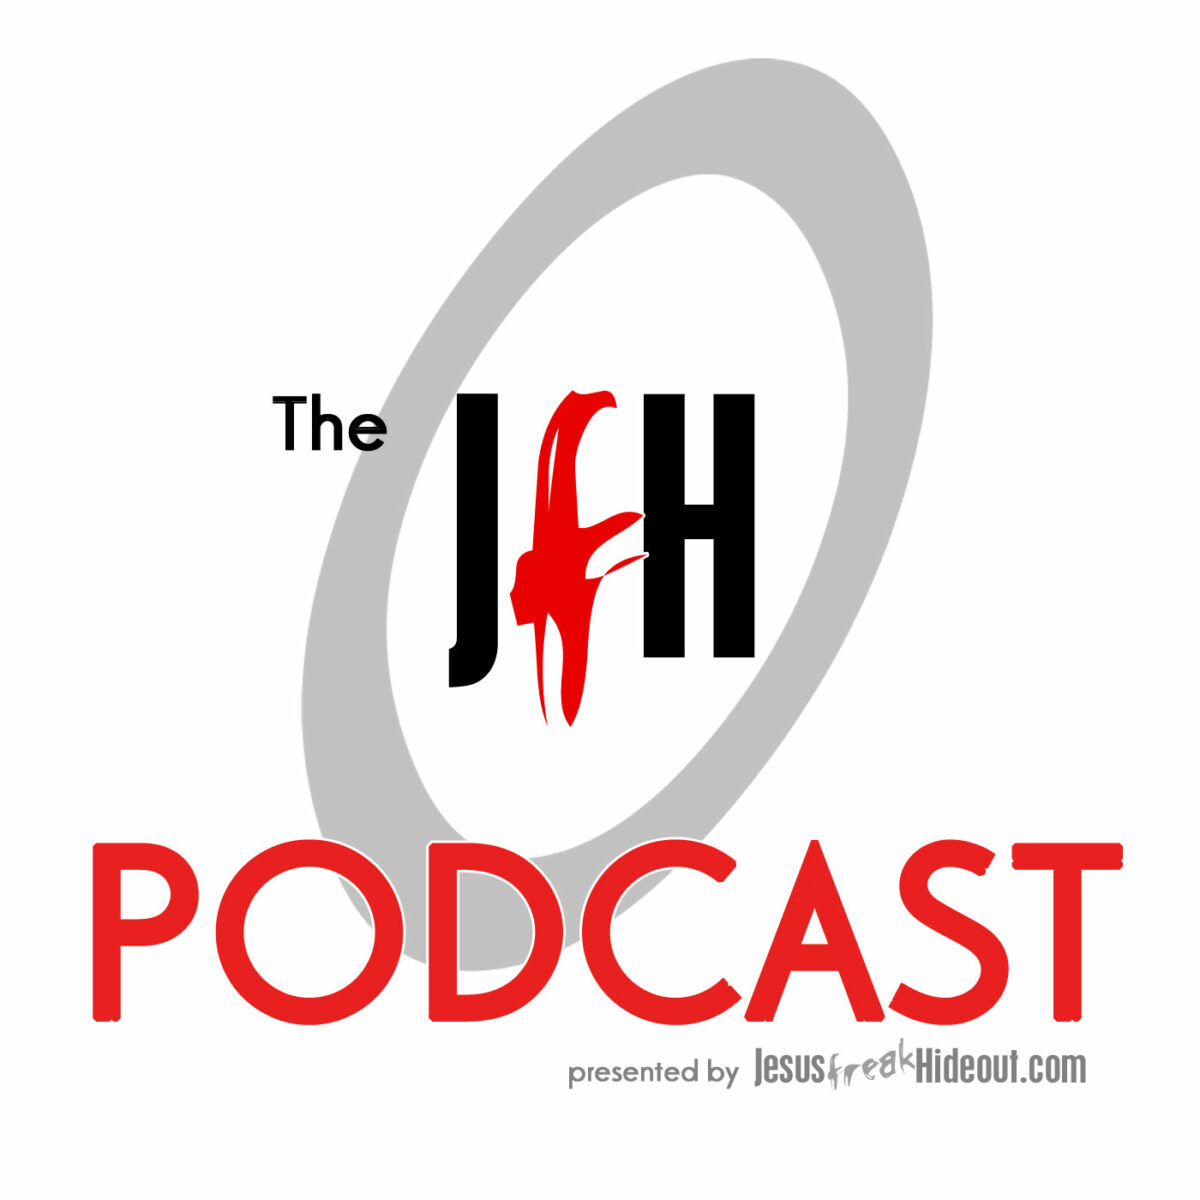 The JFH Podcast 204: 204: Encouragements for Life, Ministry, and Artistry (feat. Charlie Peacock and Andi Ashworth)